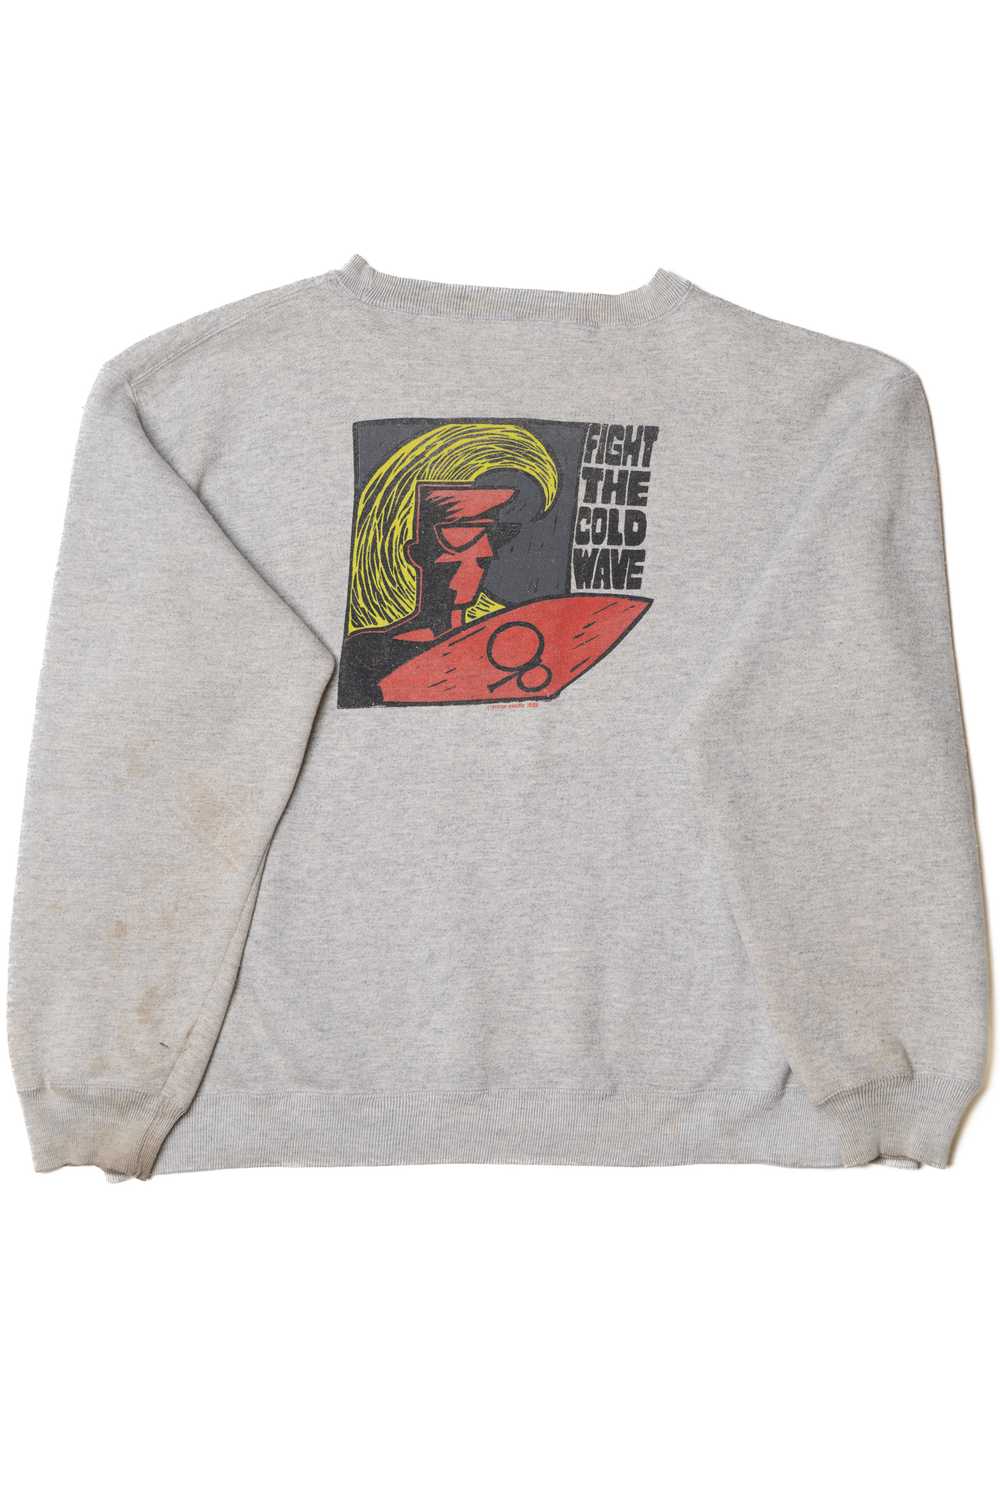 Vintage Ocean Pacific "Fight The Cold Wave" Sweat… - image 2